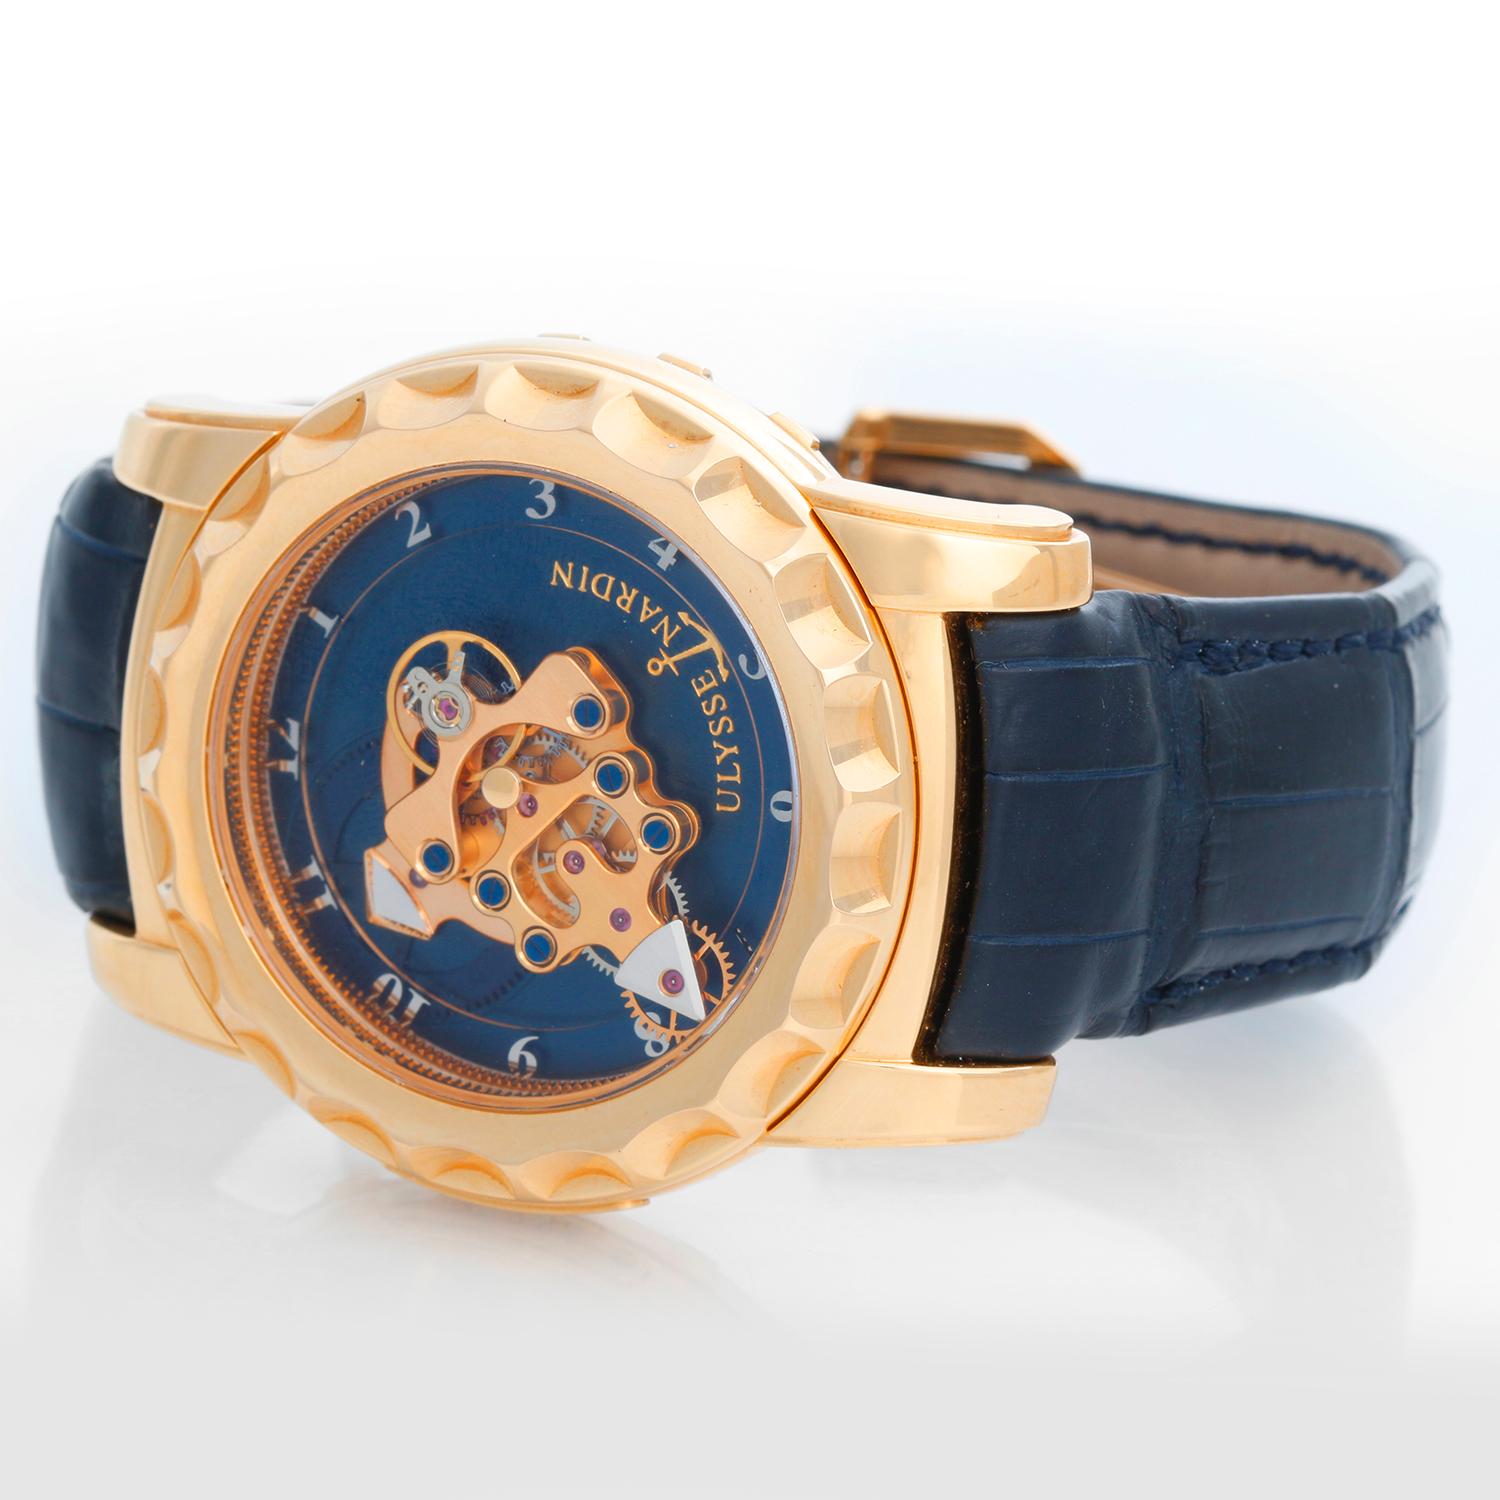 Ulysse Nardin Freak 18K  Yellow Gold Men's Watch 016-88 - Manual wind movement with 7 Day Power Reserve. 18K Yellow gold  ( 42.5 mm ) The watch is wound by the bezel. Blue dial; The actual movement acts as the hand. Blue alligator strap with